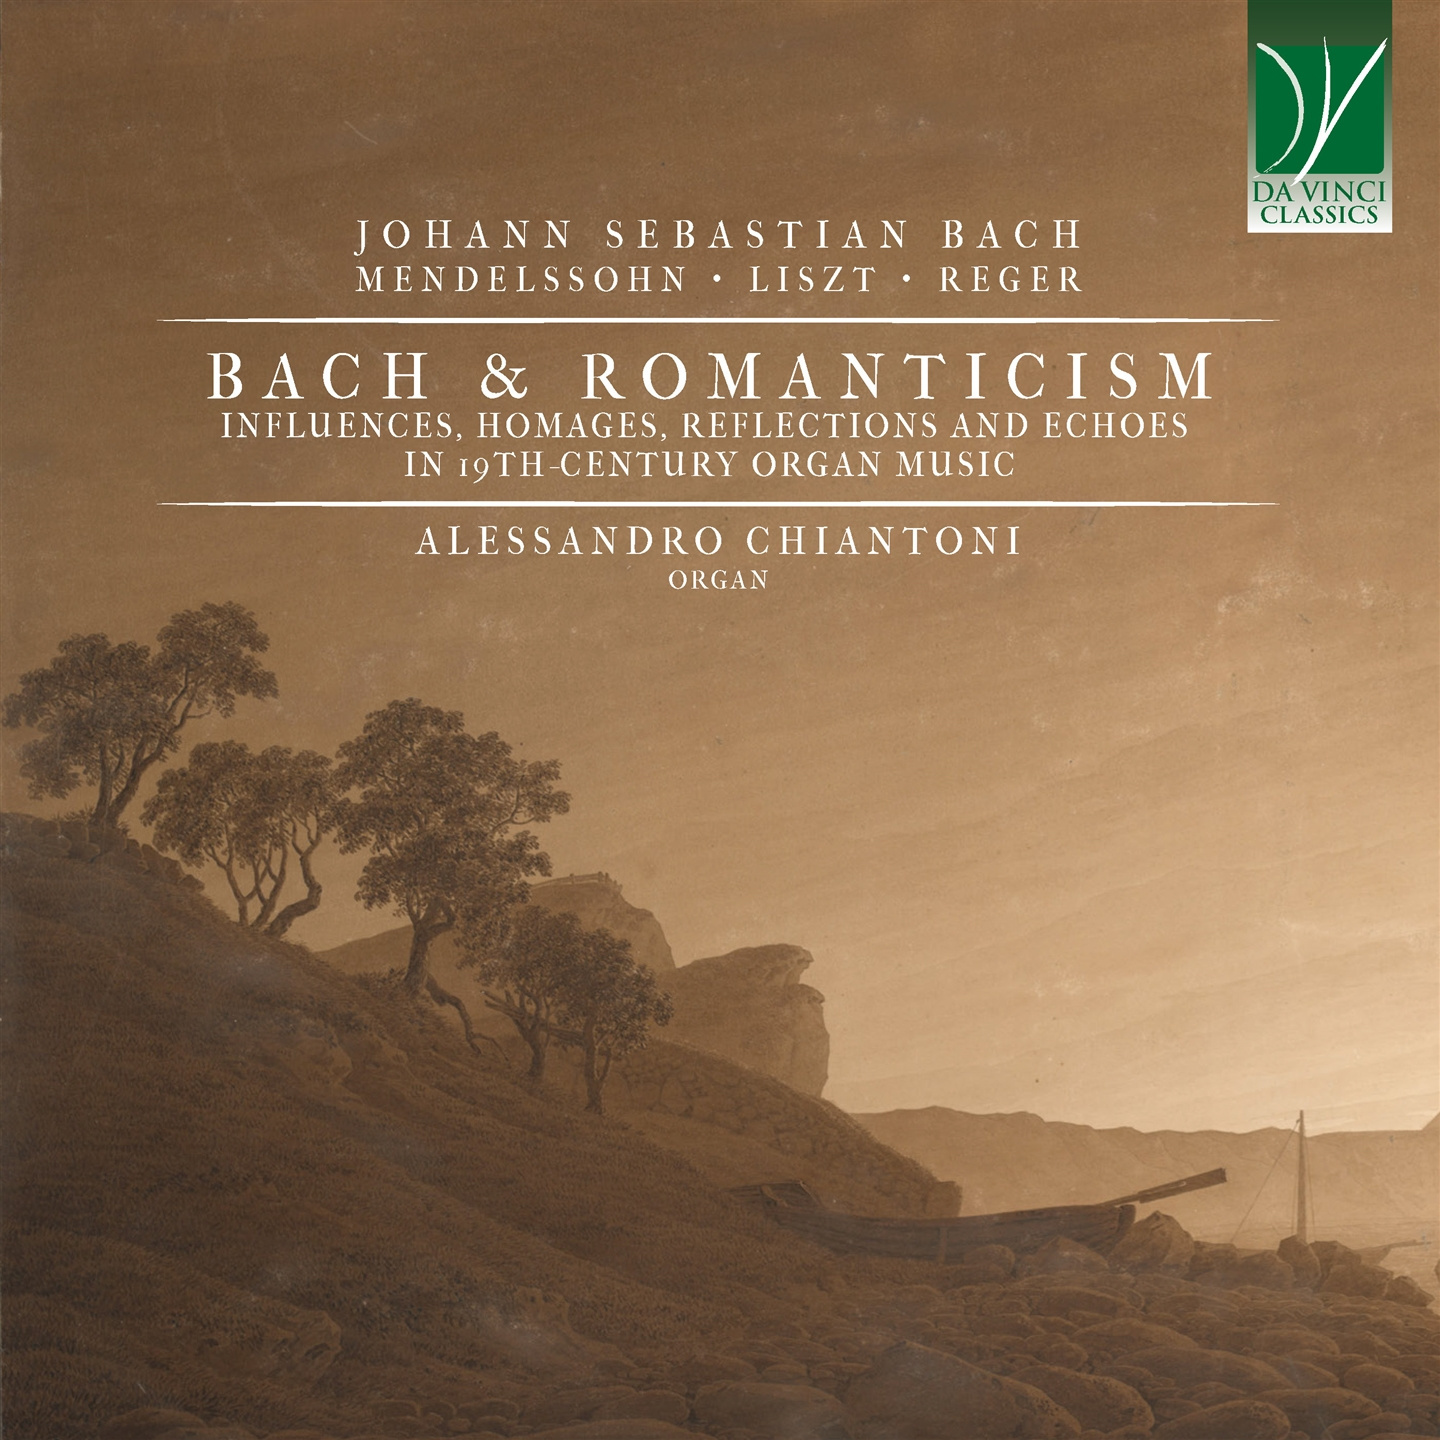 BACH AND ROMANTICISM, INFLUENCES, HOMAGES, REFLECTIONS AND ECHOES IN 19TH-CENTU